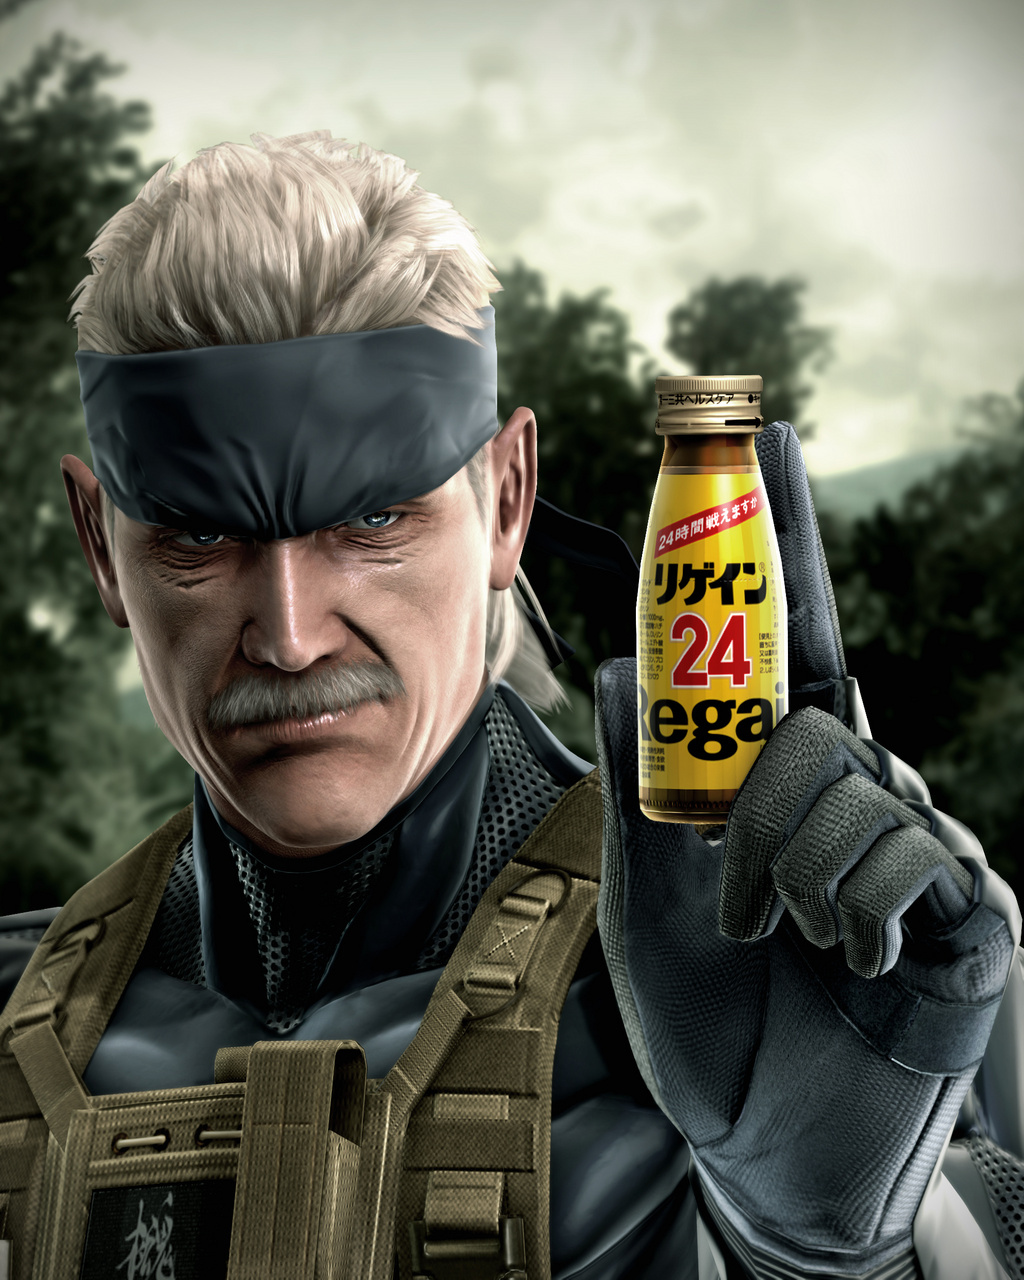 funny video game promotional items - Metal Gear Regain Energy Drink